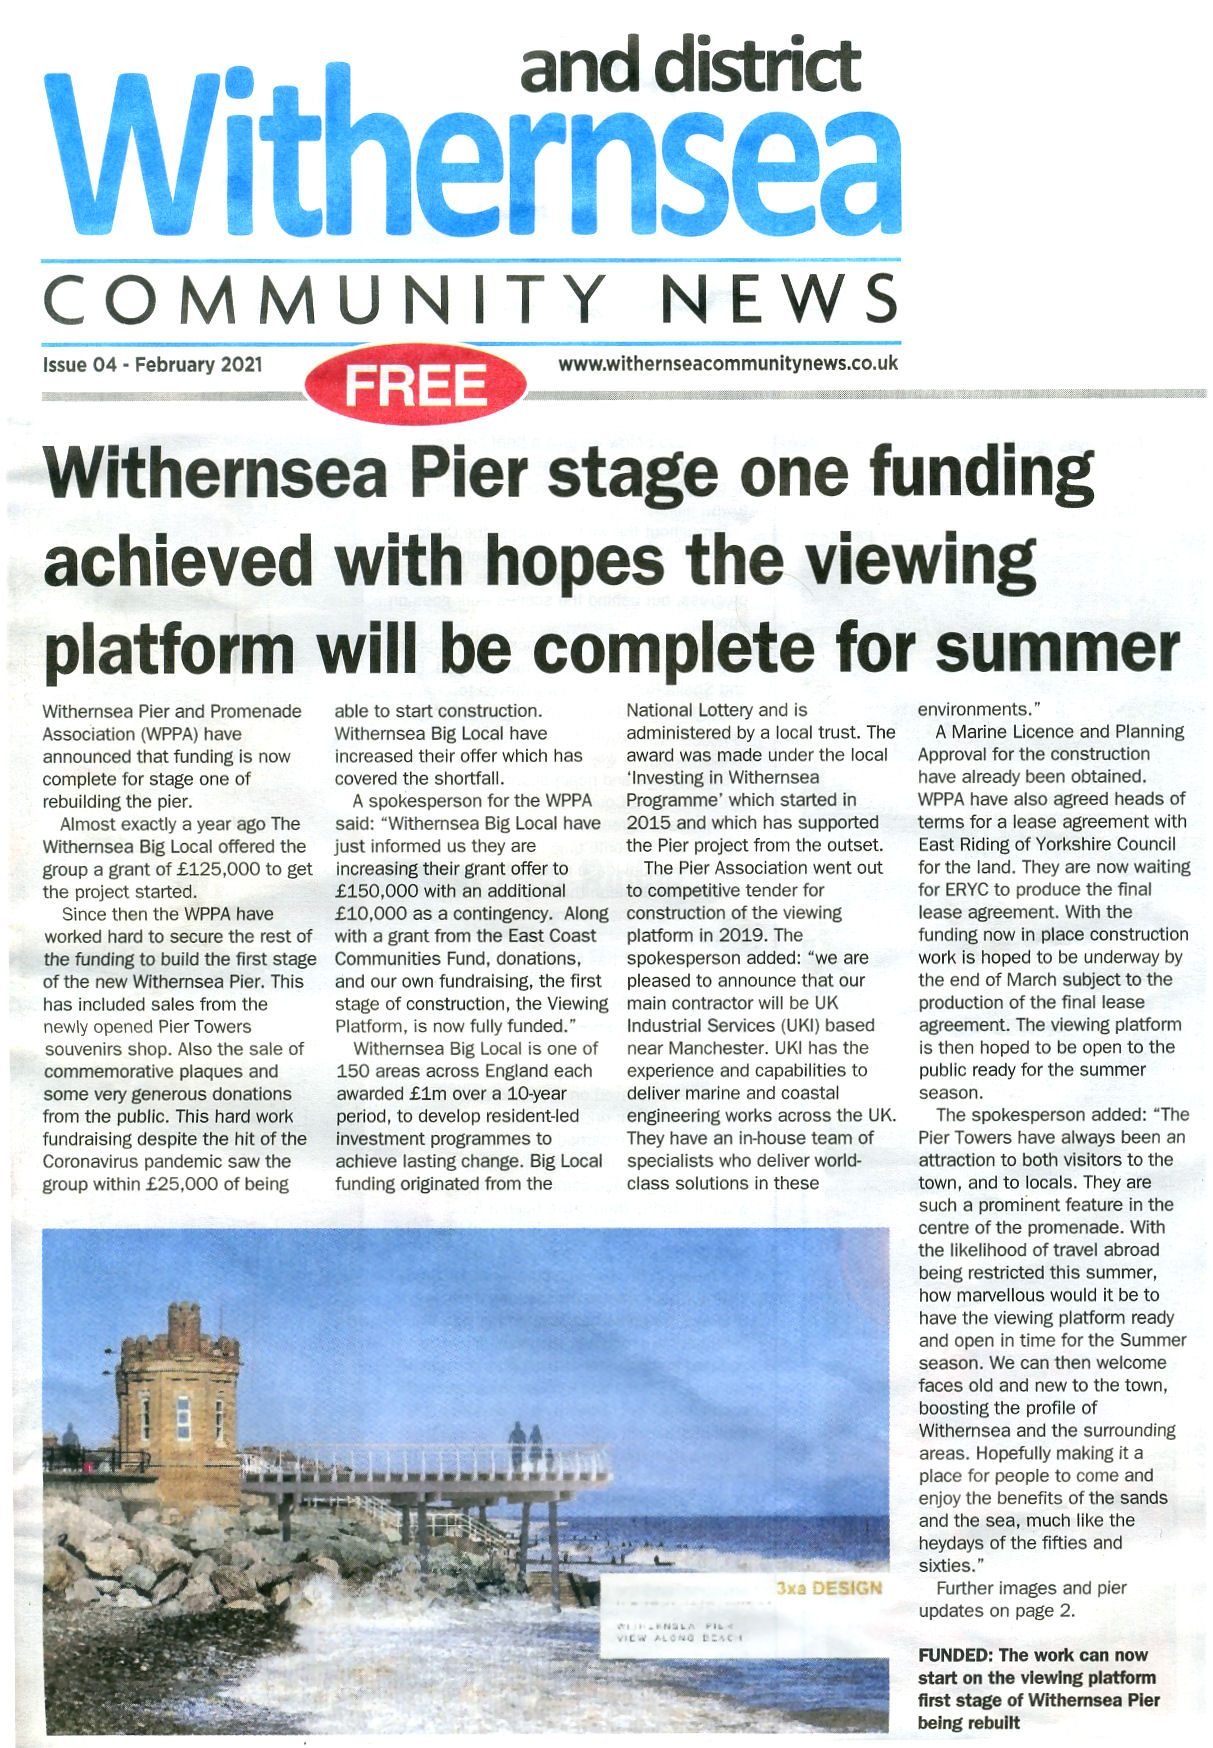 Withernsea Community News